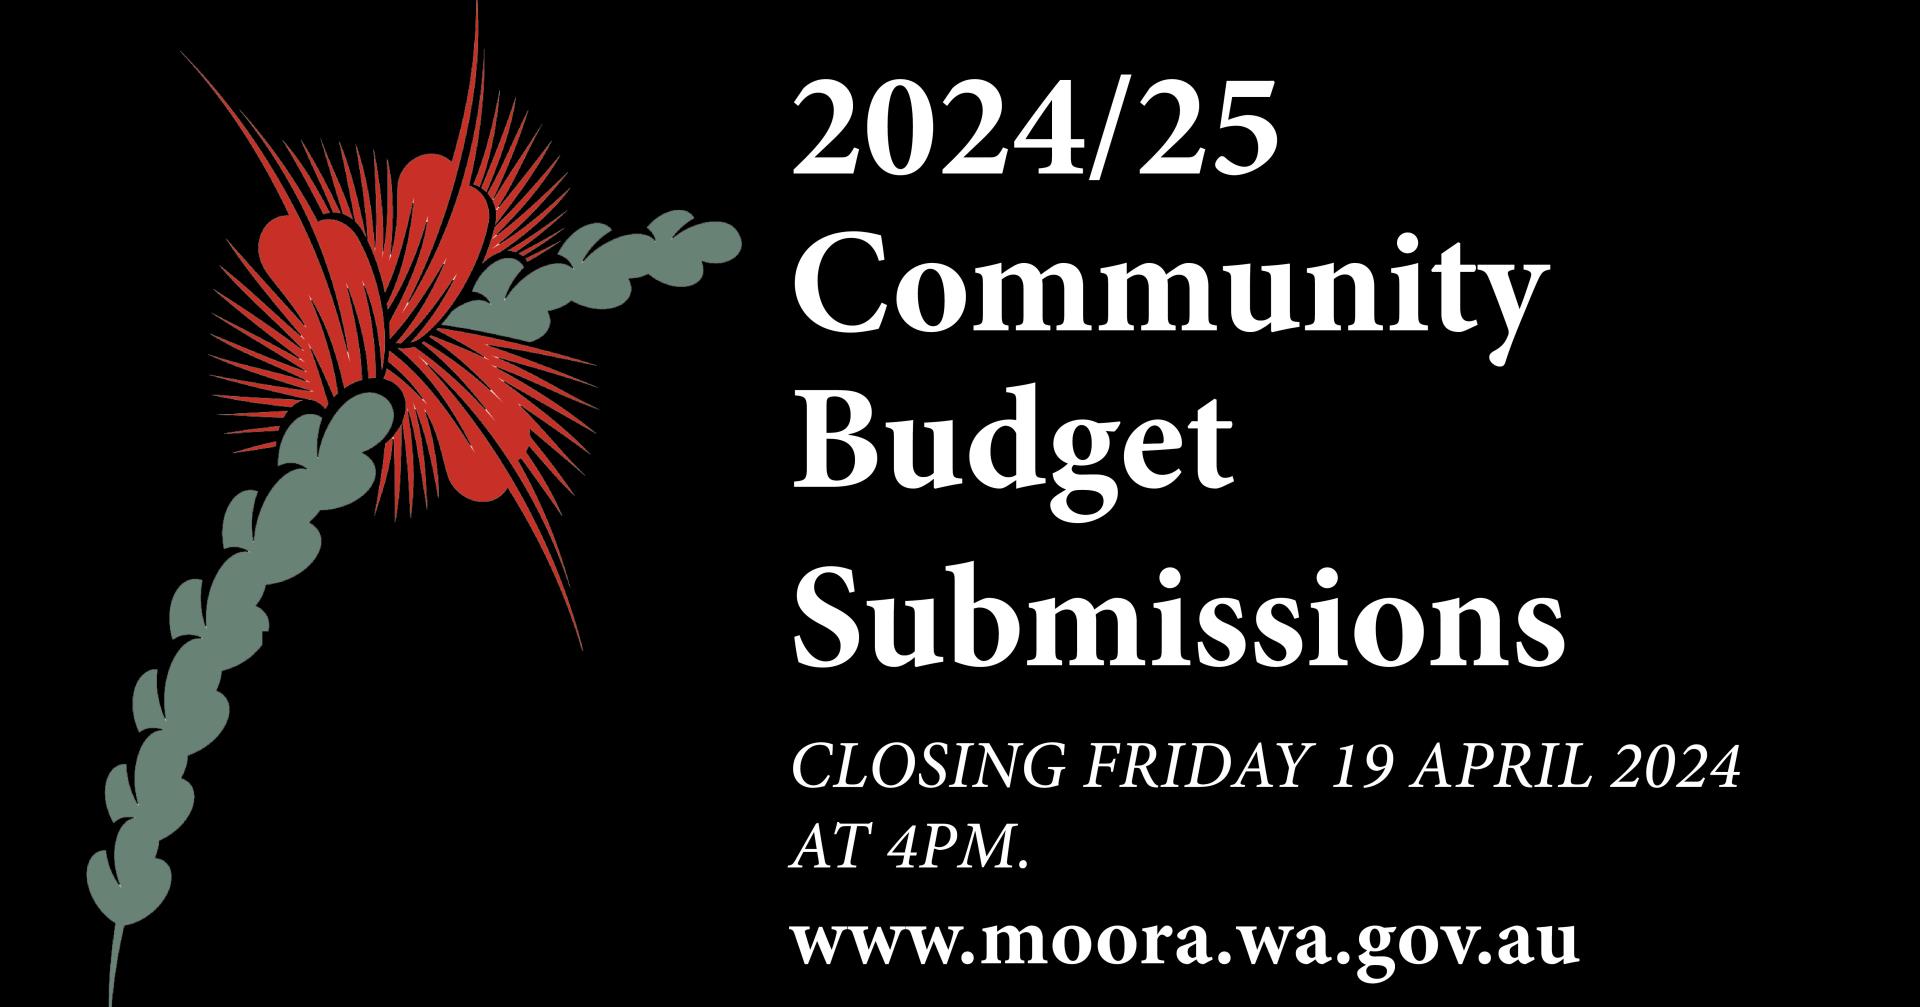 News Story: Community Budget Submissions 2024/2025